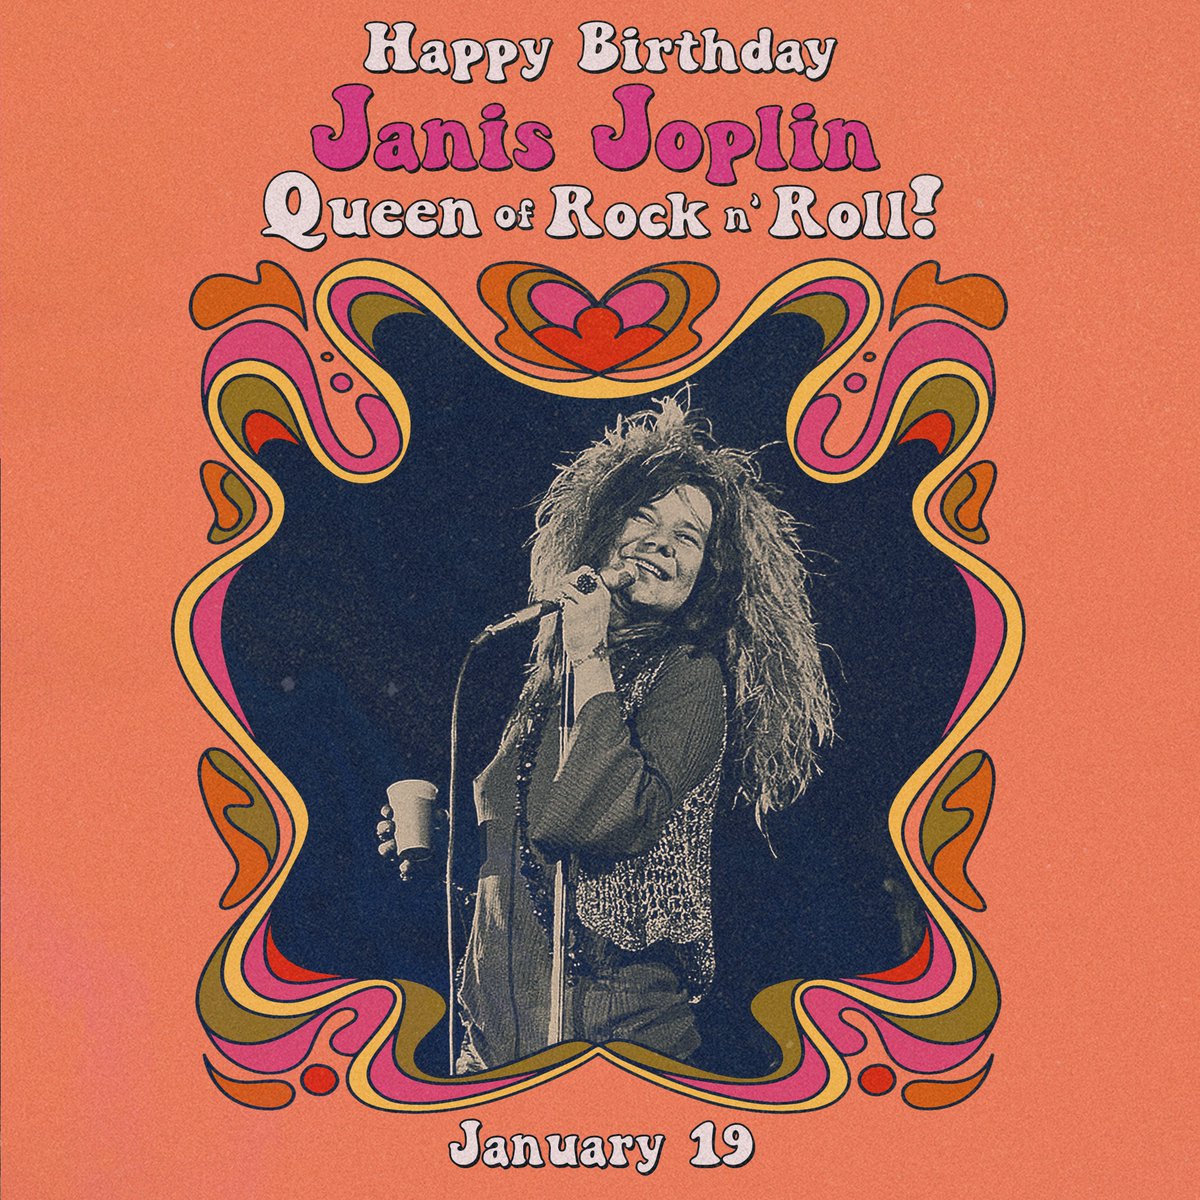 Happy Birthday to the Queen of Rock N’ Roll, @JanisJoplin!

Photo courtesy of Getty Images.

#TheDoors #JanisJoplin #QueenOfRockNRoll #RockBirthdays